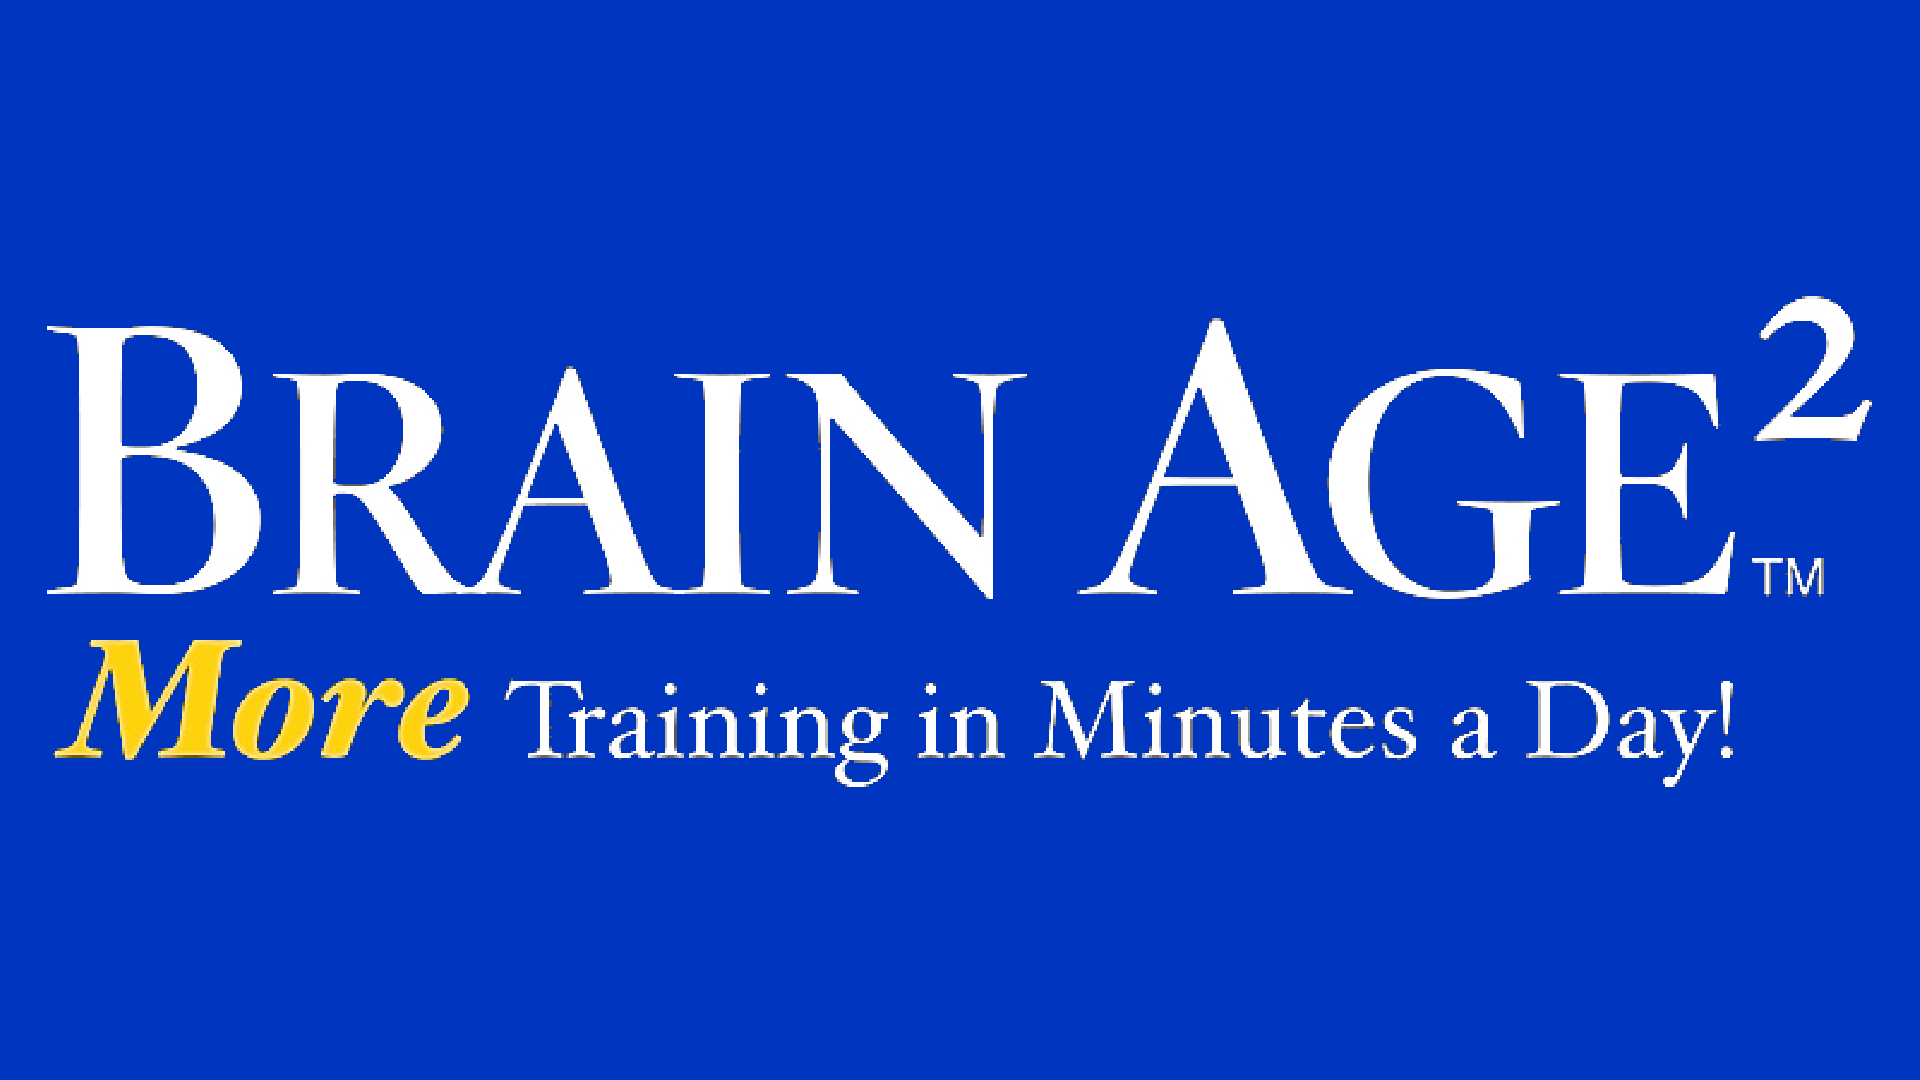 Brain Age 2: More Training in Minutes a Day! Logo